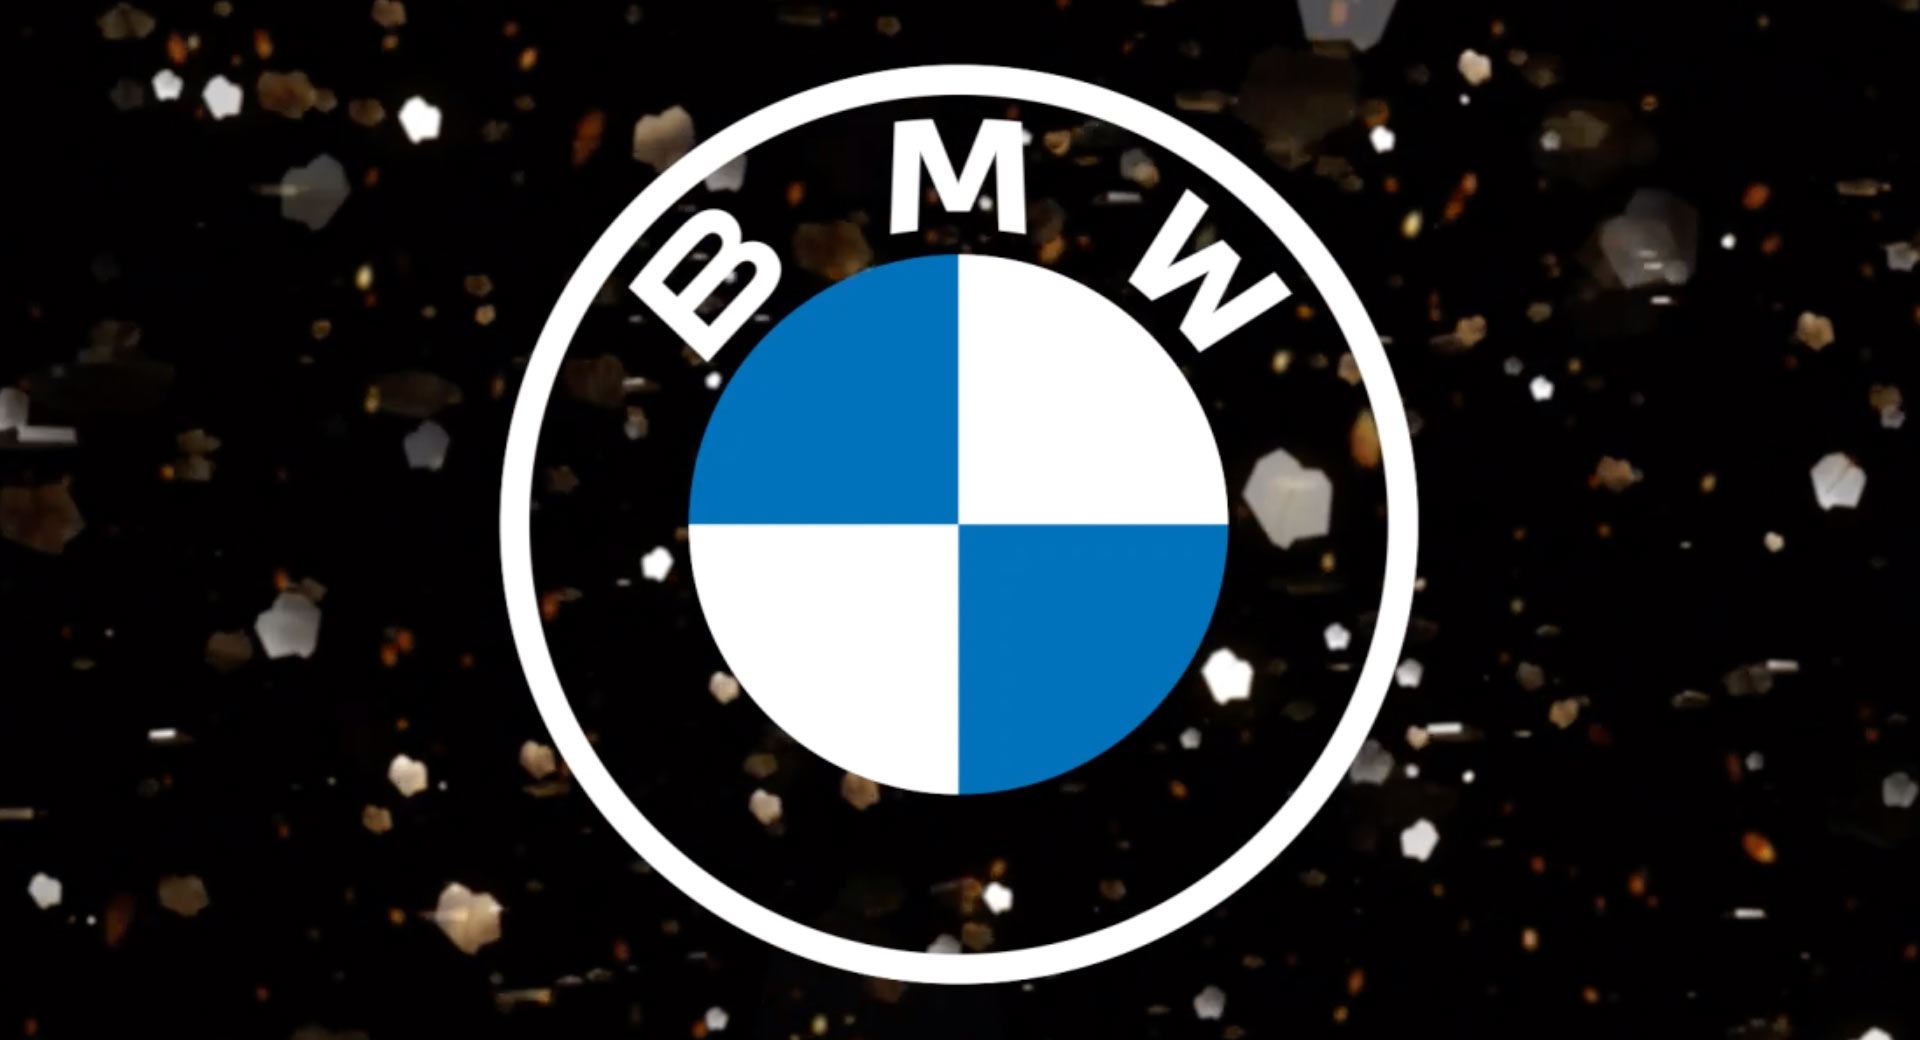 BMW Officially Introduces New Flat Logo For Use On Promotional